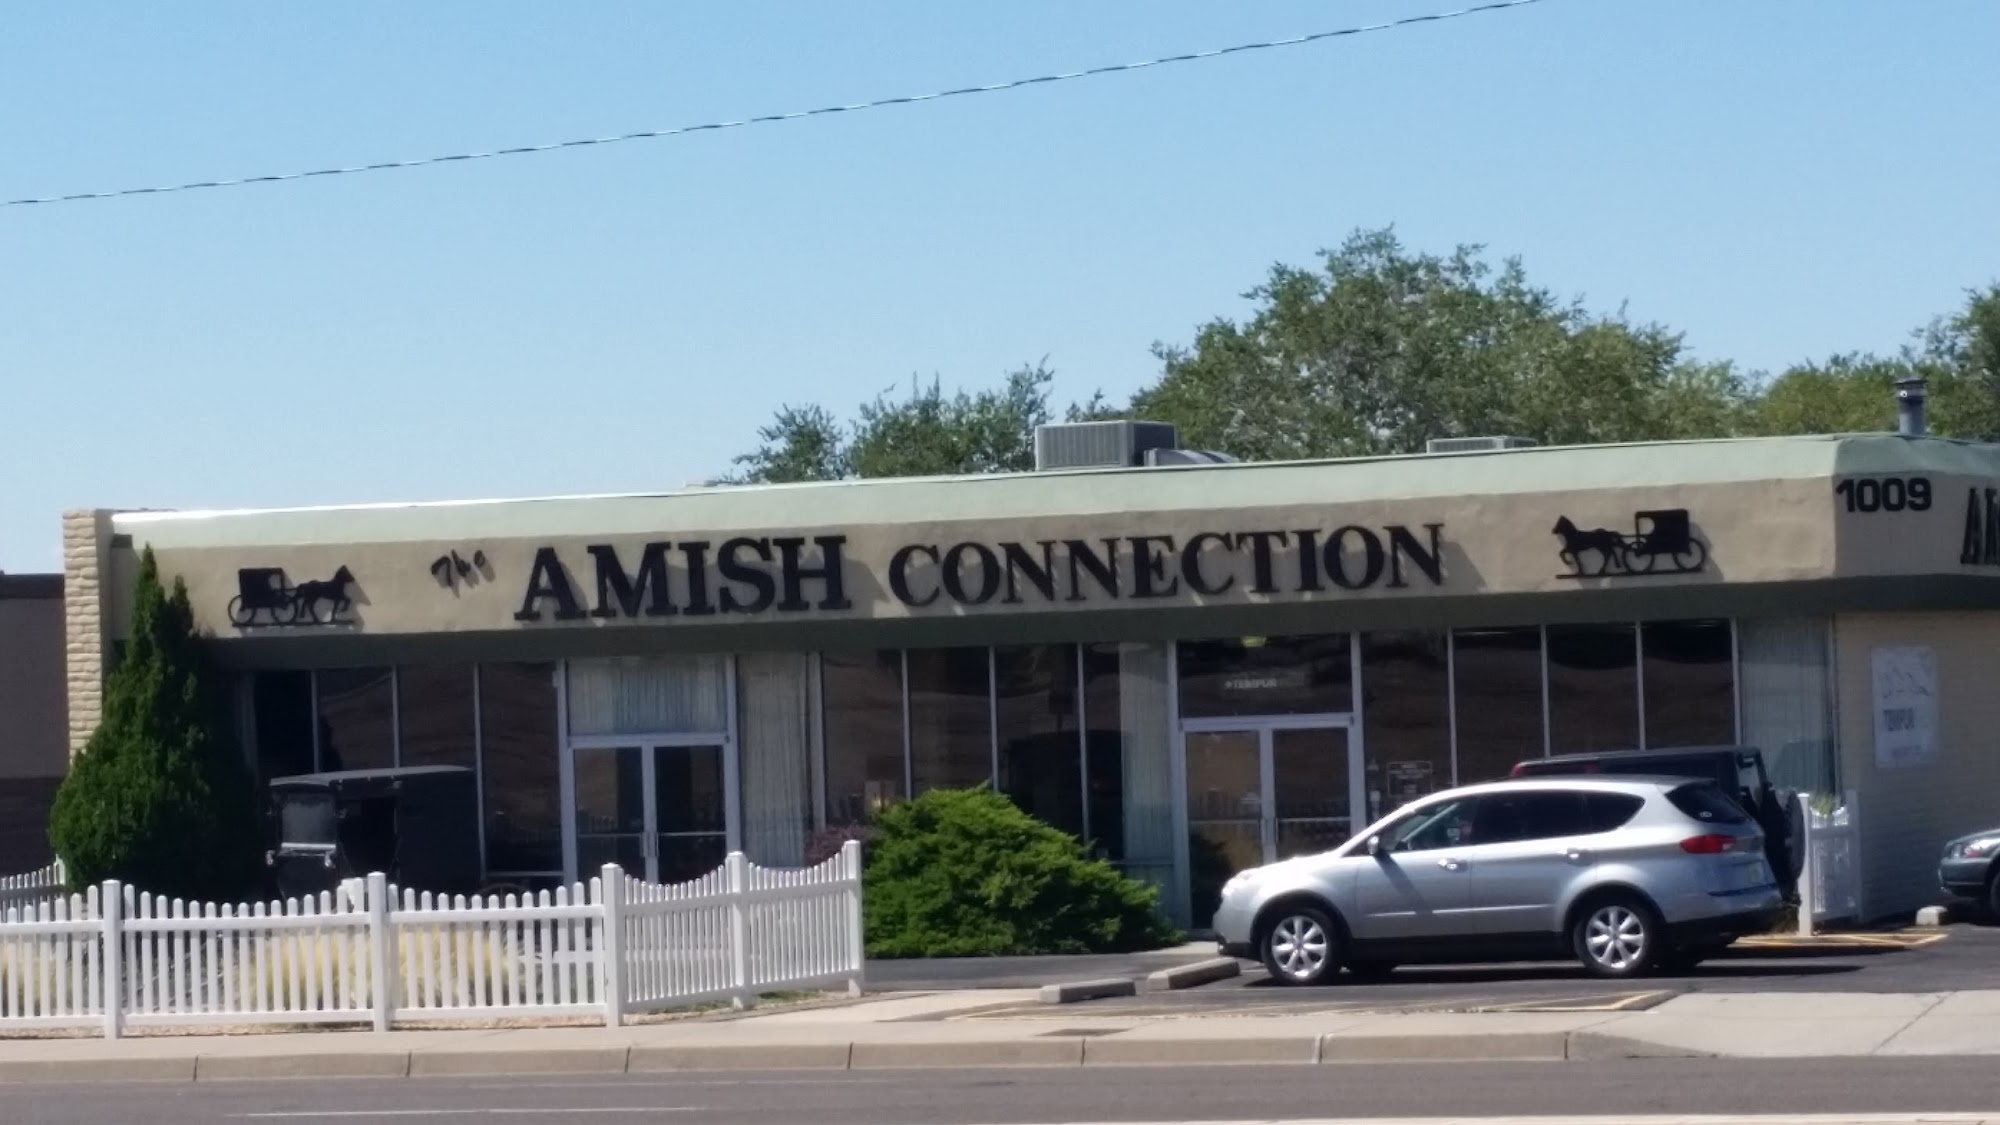 The Amish Connection